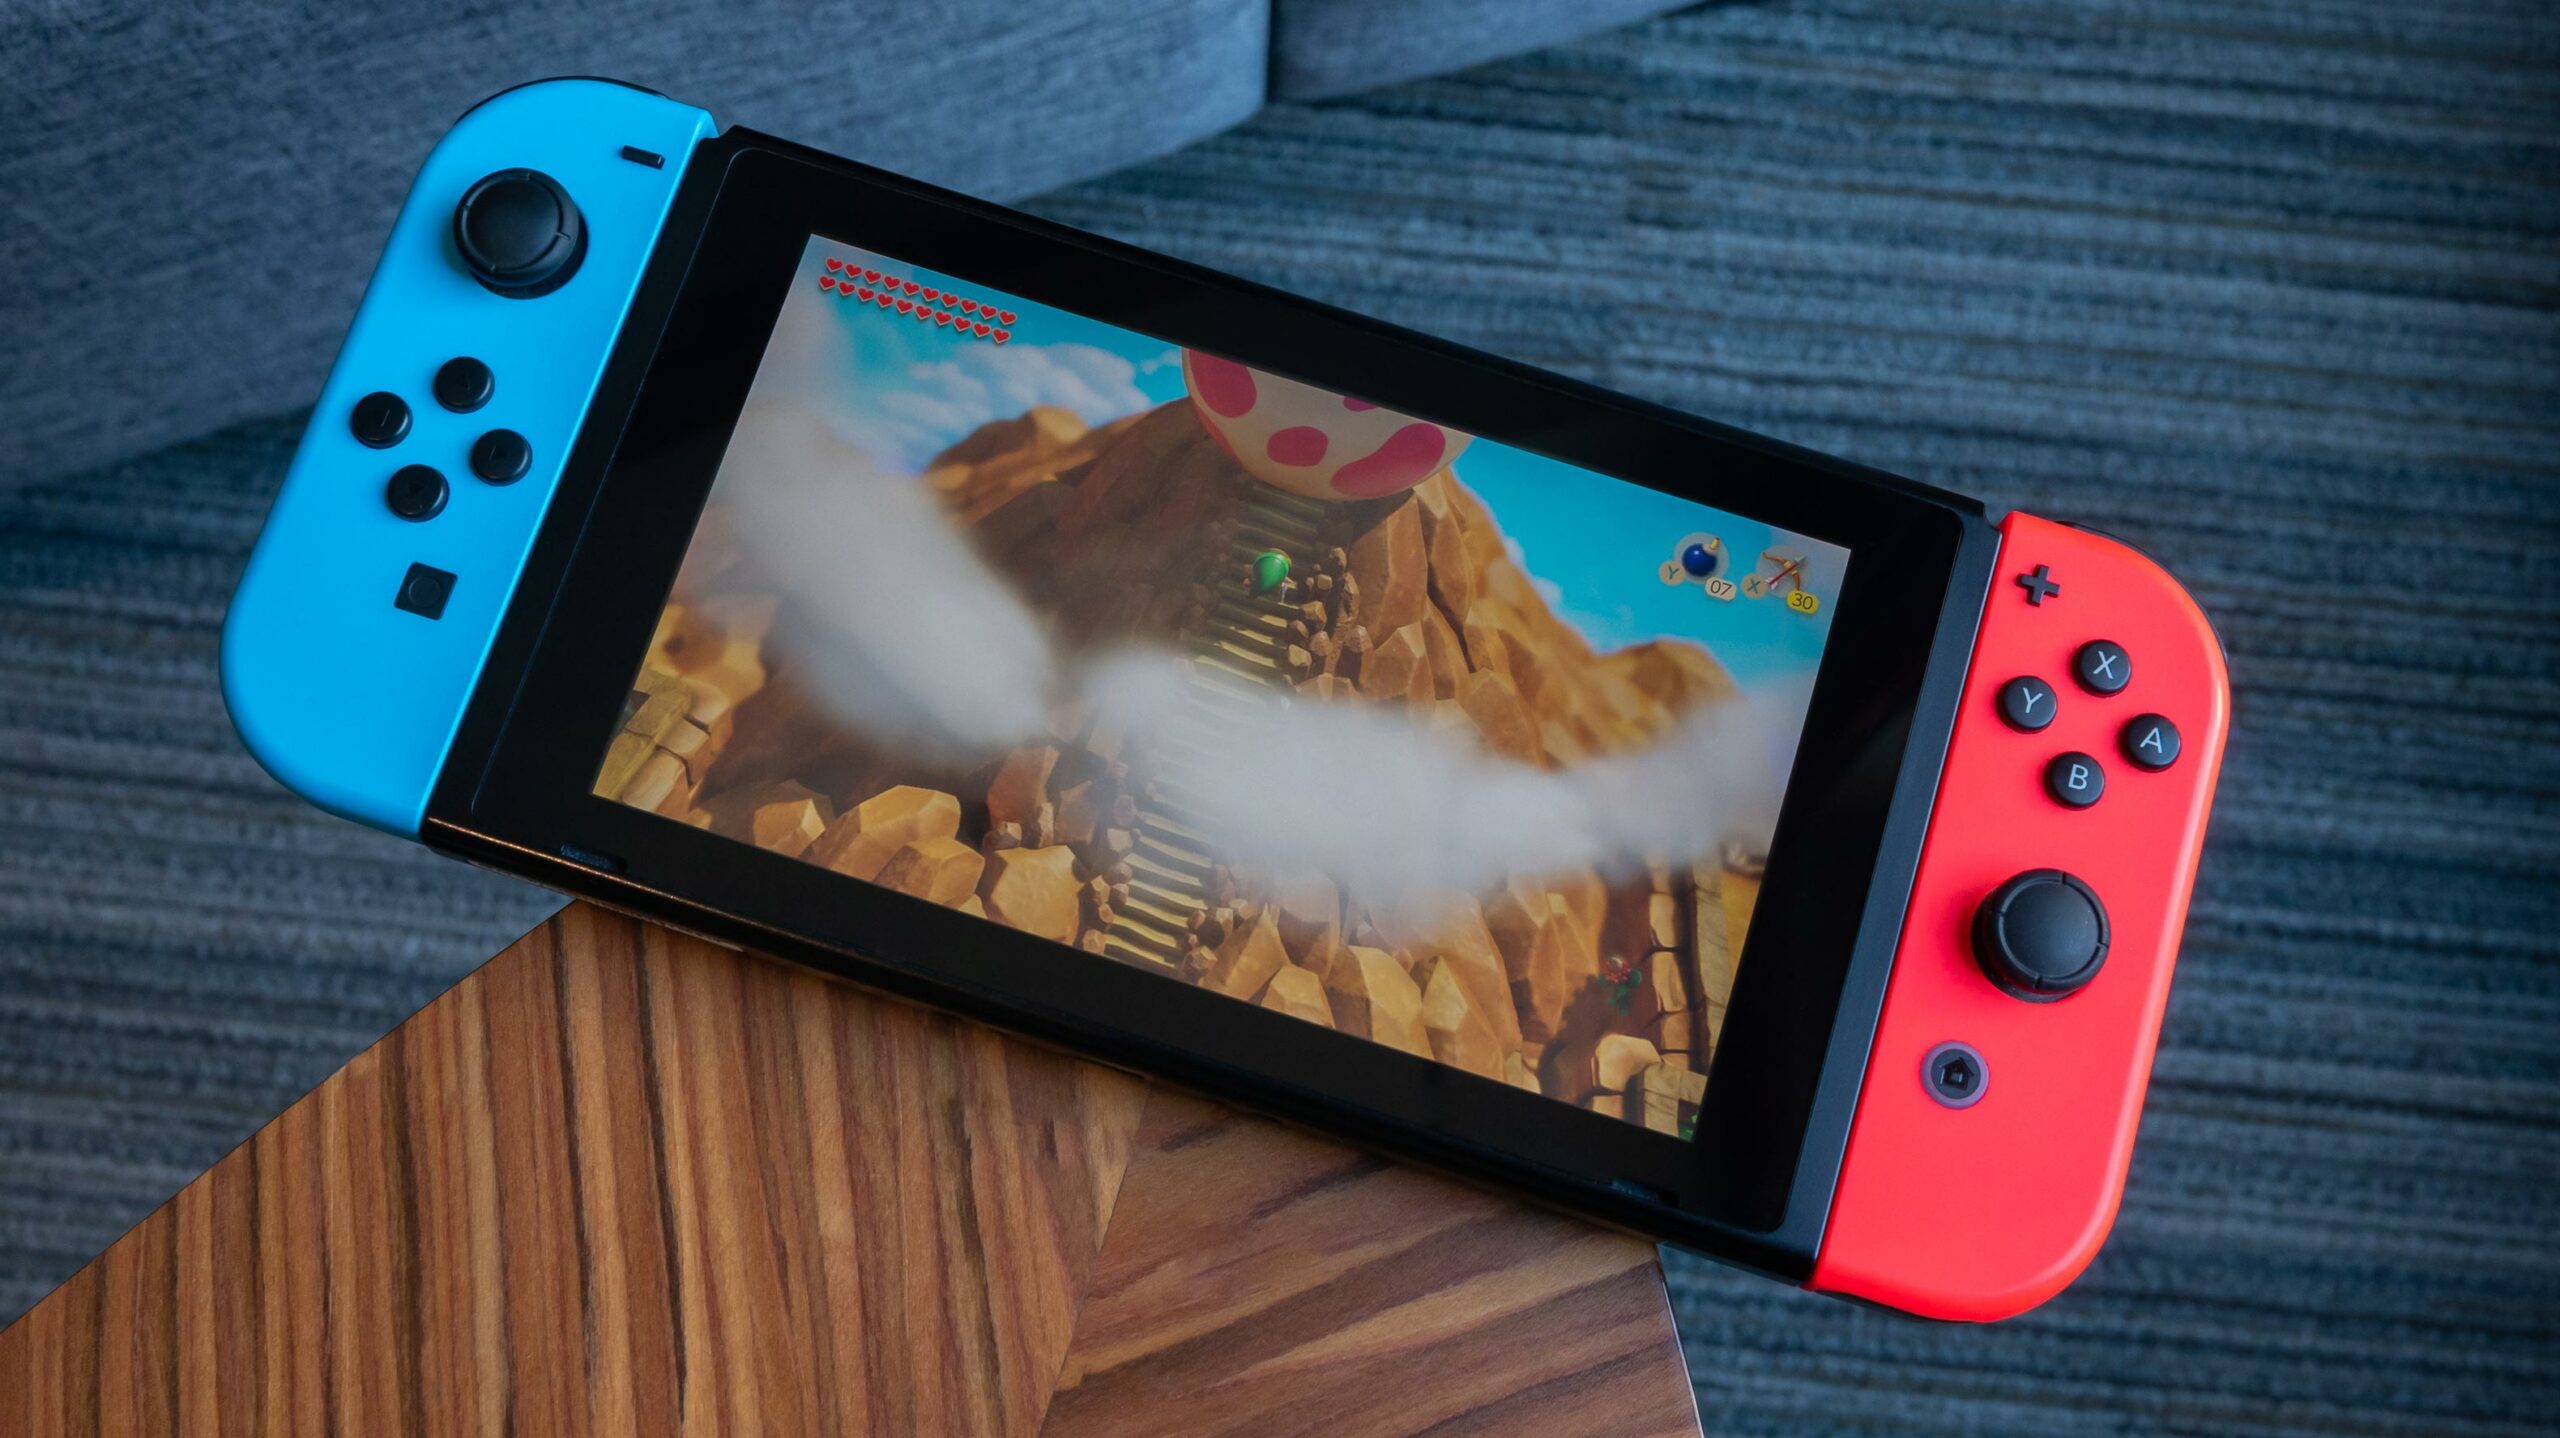 Nintendo Switch is Canada’s best-selling console for the fifth year in a row